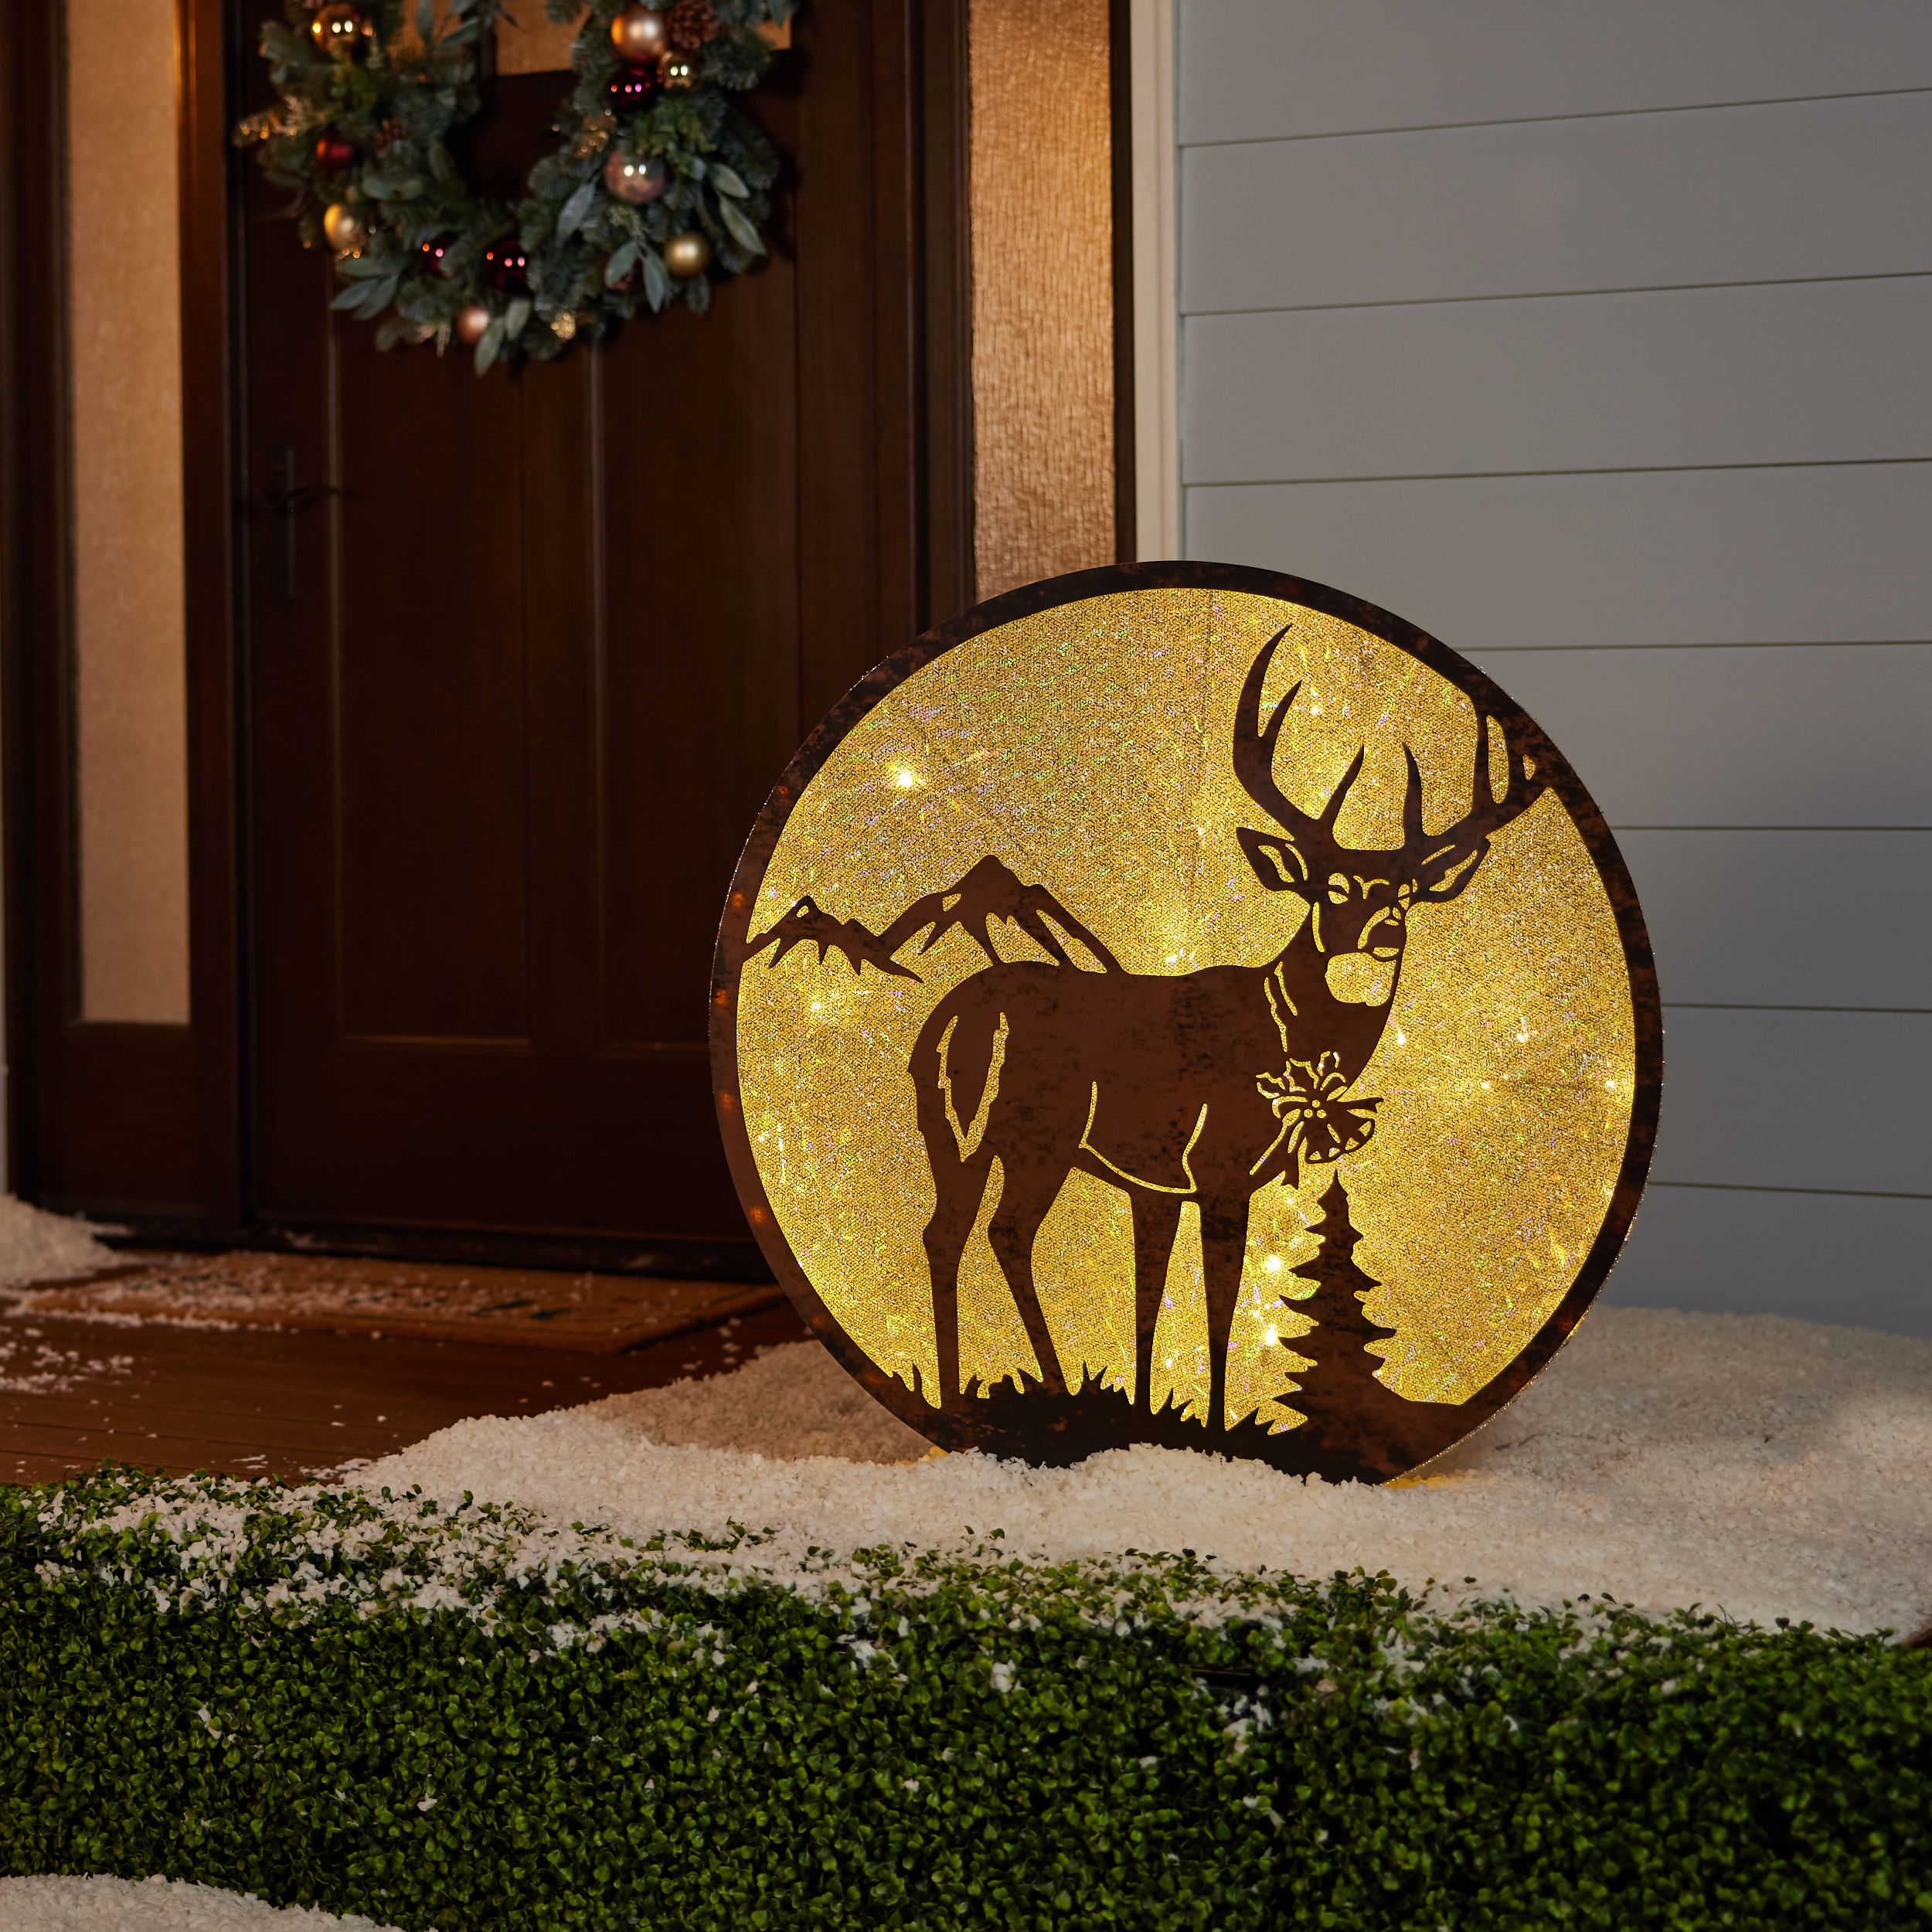 LED White Outdoor Christmas Decor at